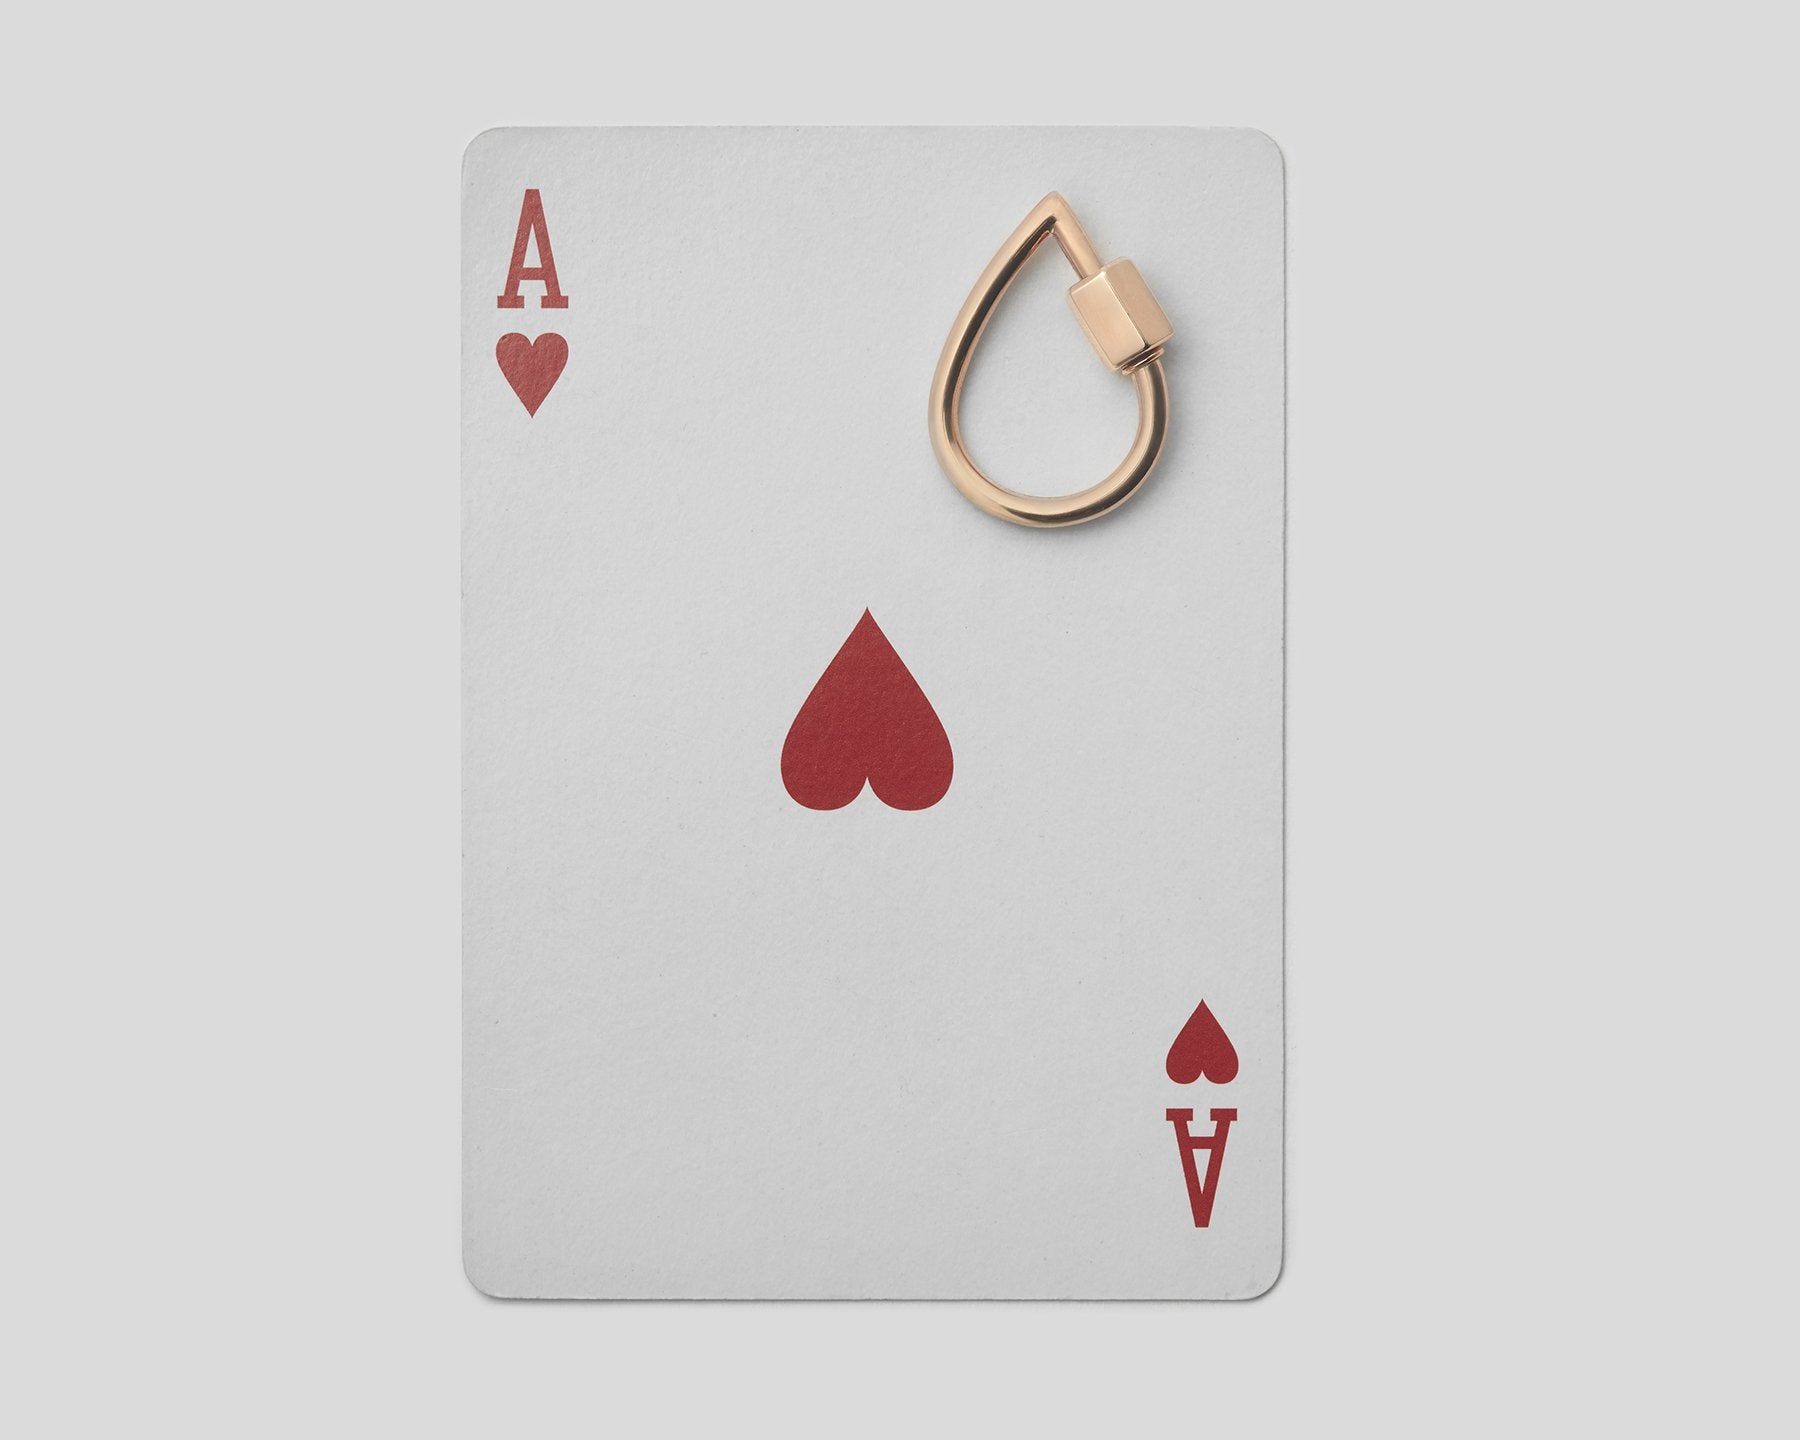 Small rose gold droplock on top of ace of hearts playing card